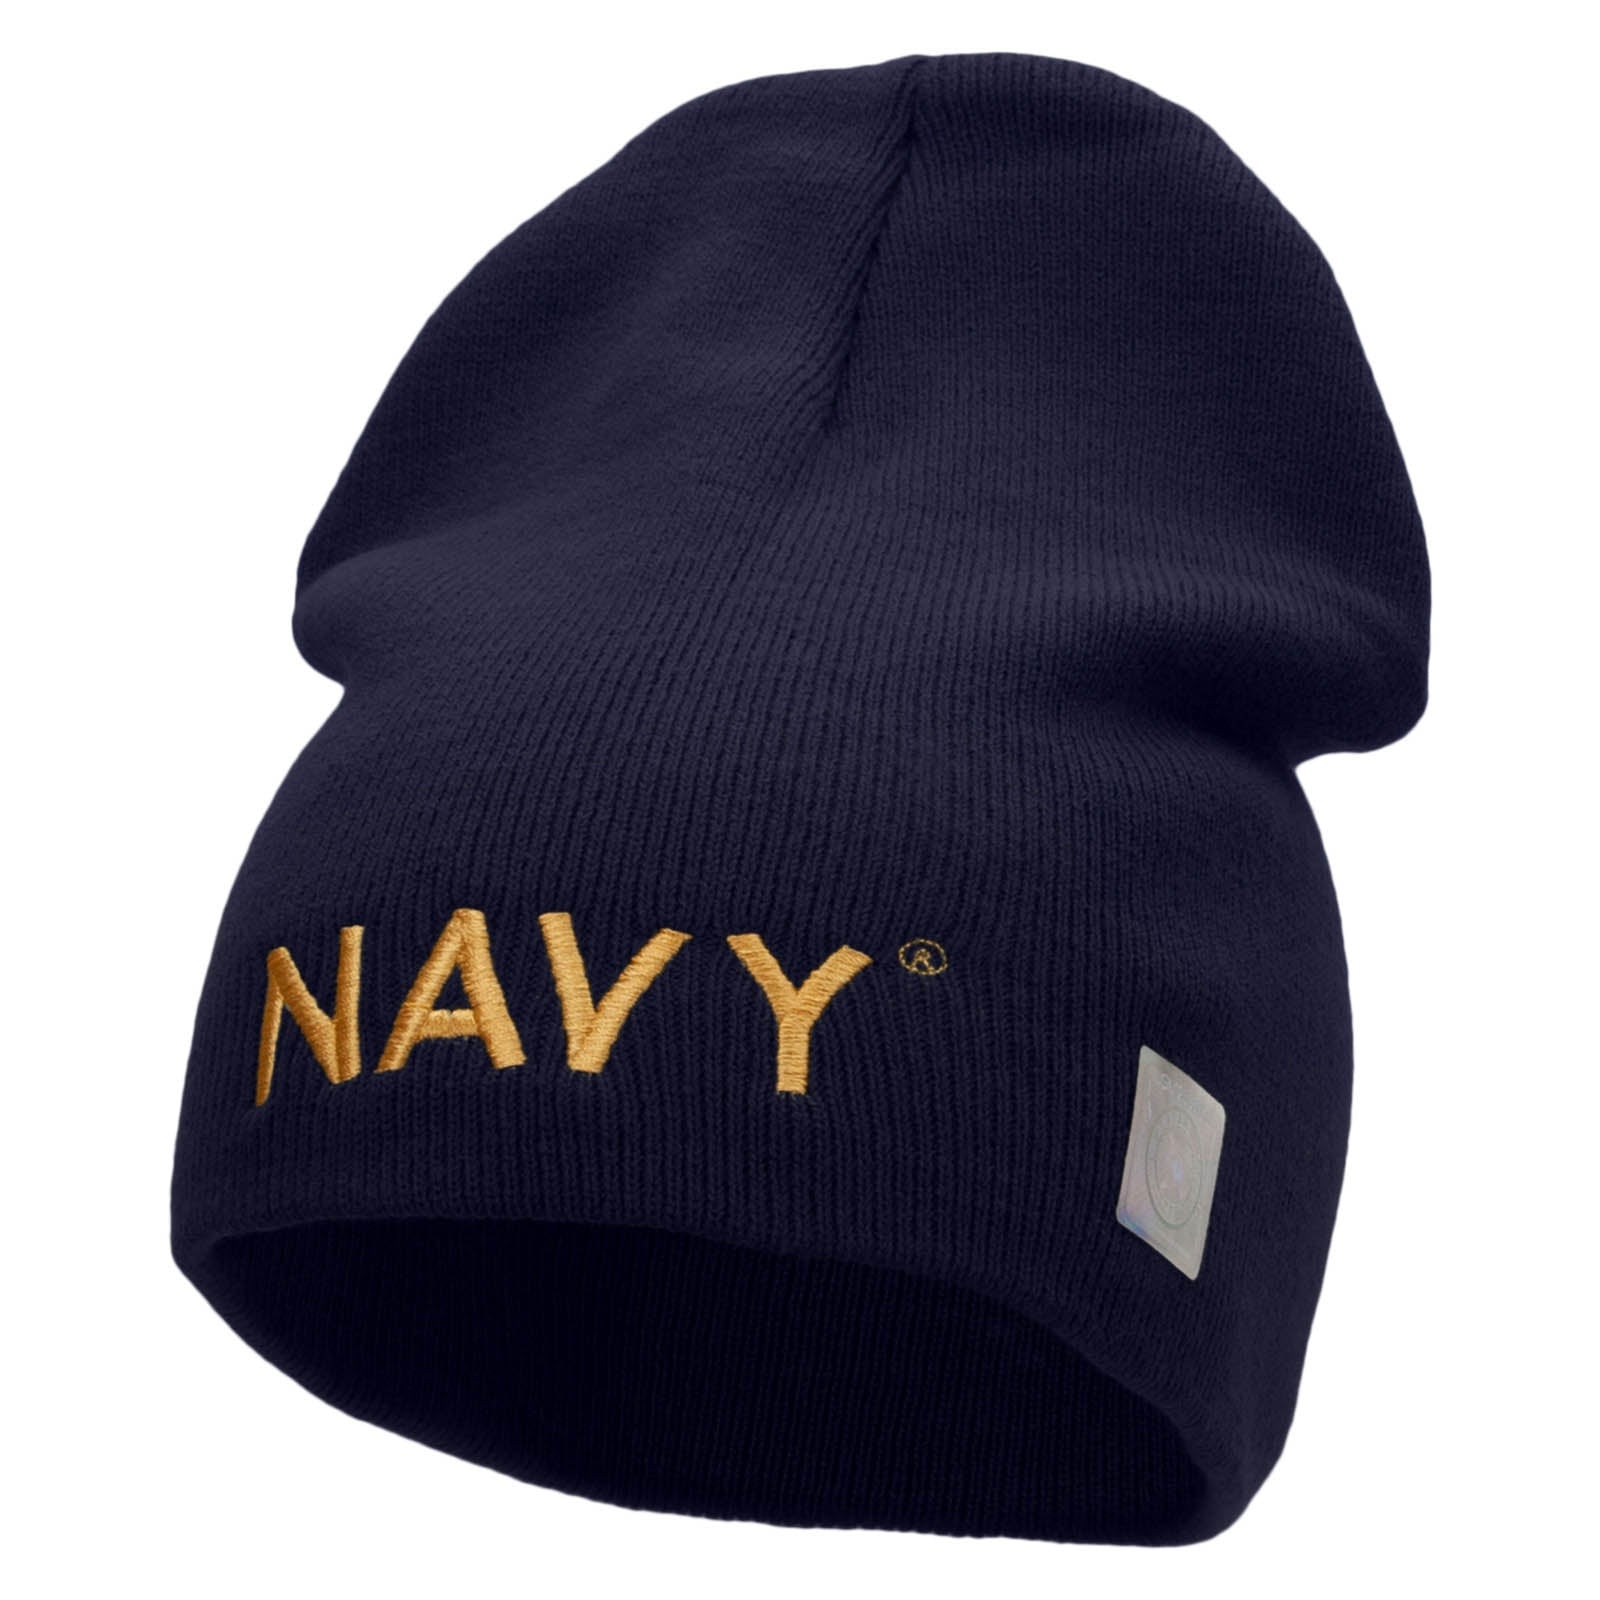 Licensed Navy Embroidered Short Beanie Made in USA - Navy OSFM